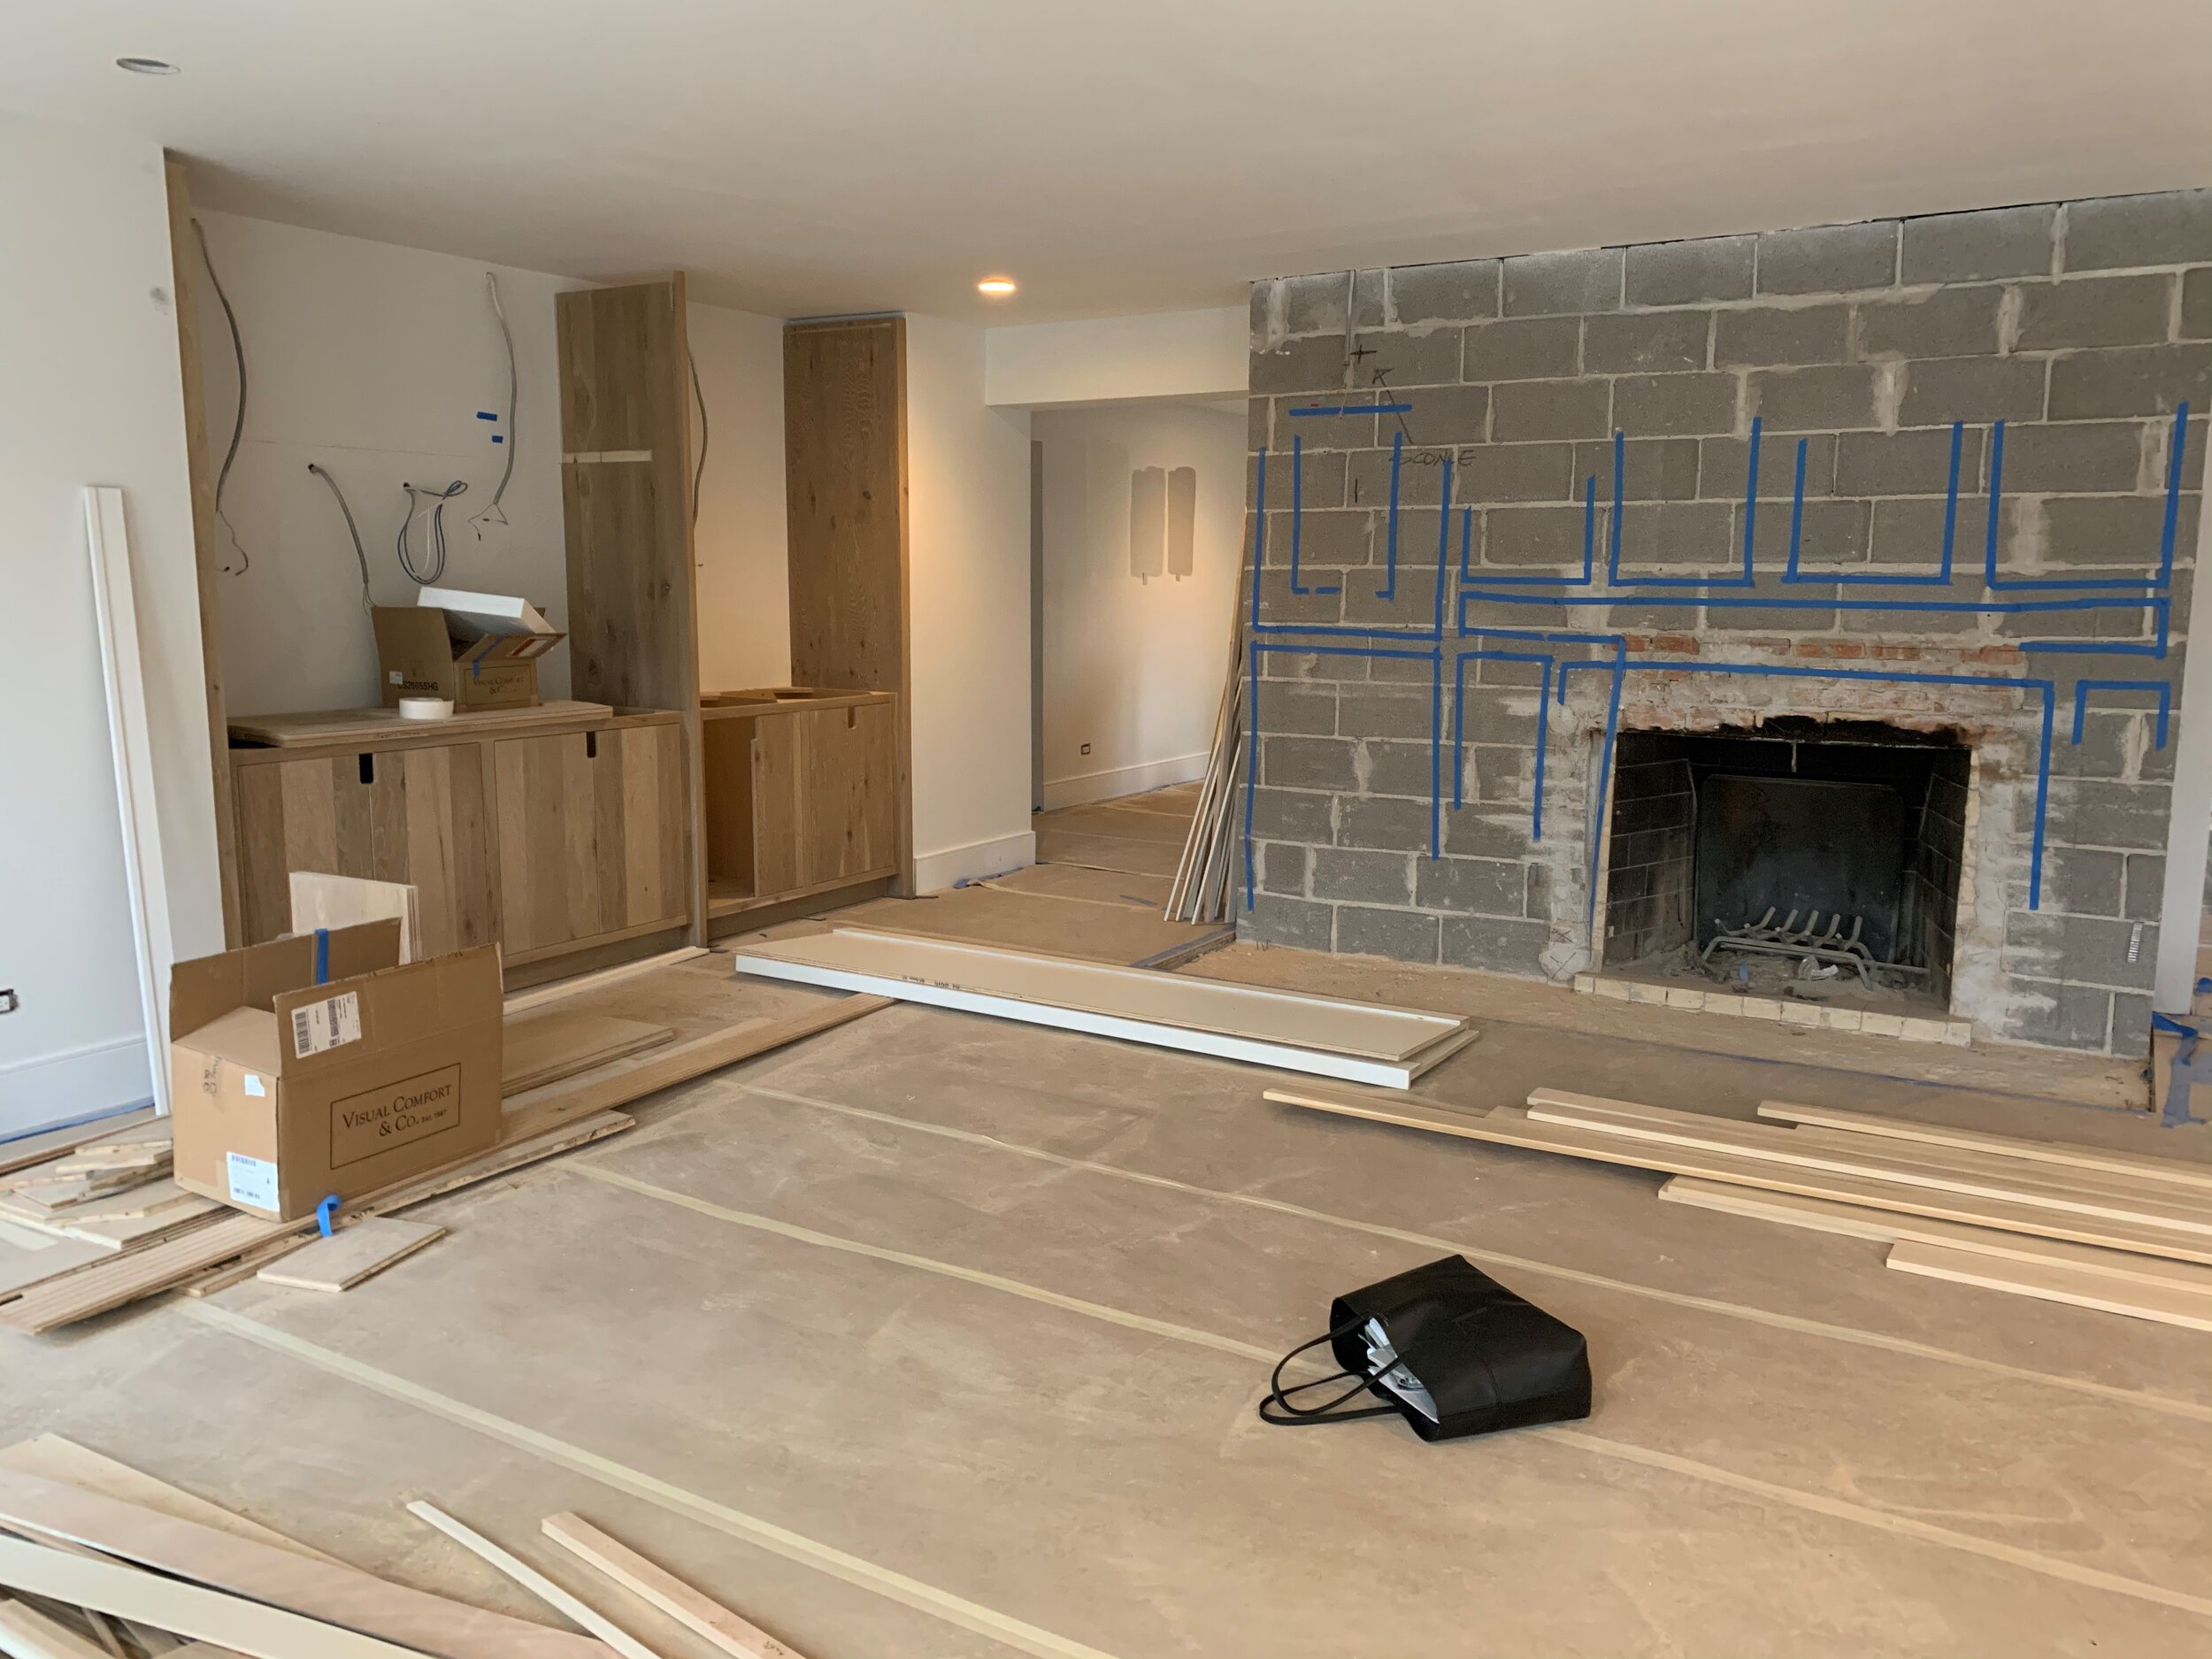 In Progress: Updating to neutral colors can ensure your remodel will last the test of time.